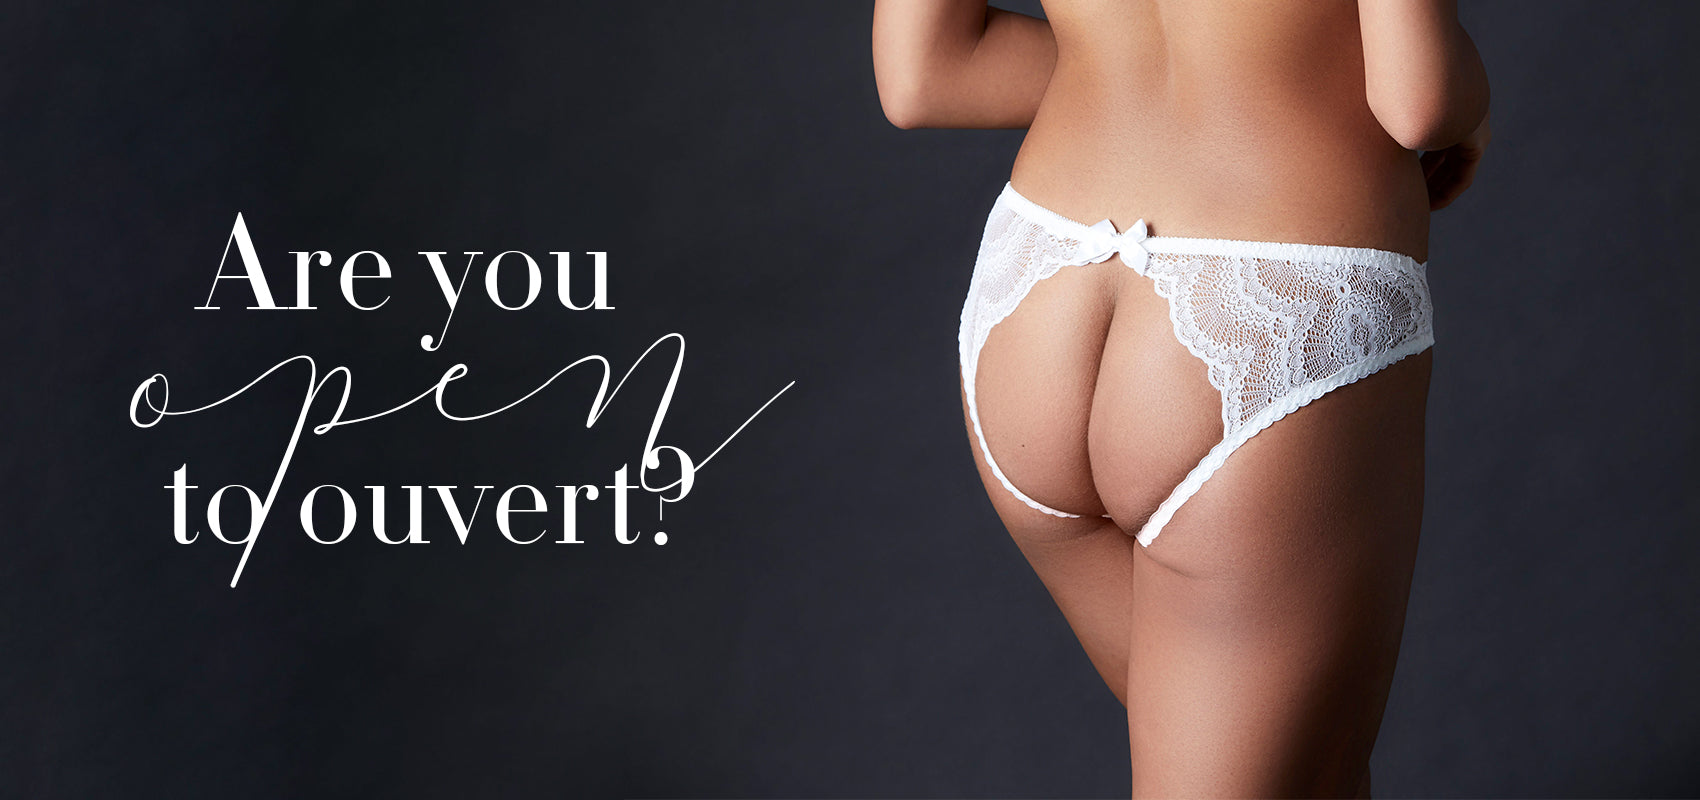 Are You Open to Ouvert? – Journelle